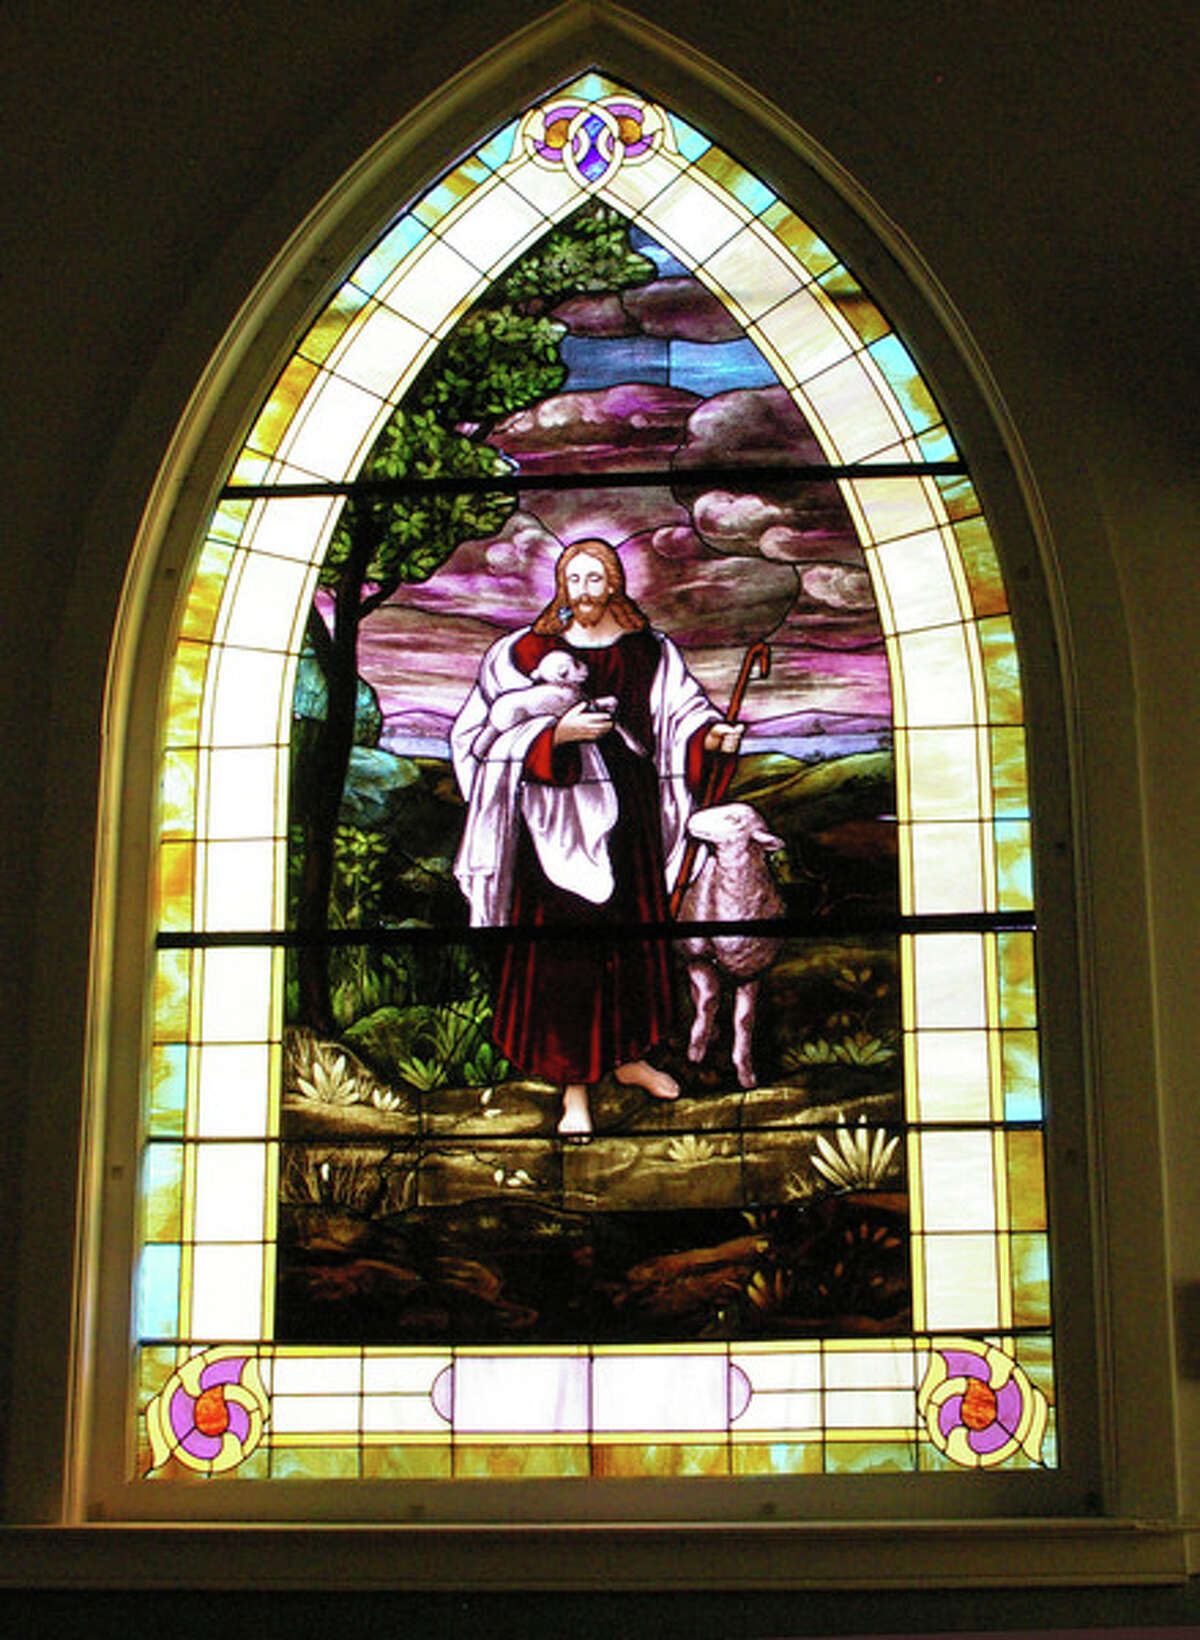 Inside the church, stained glass windows of various sizes filter the light.